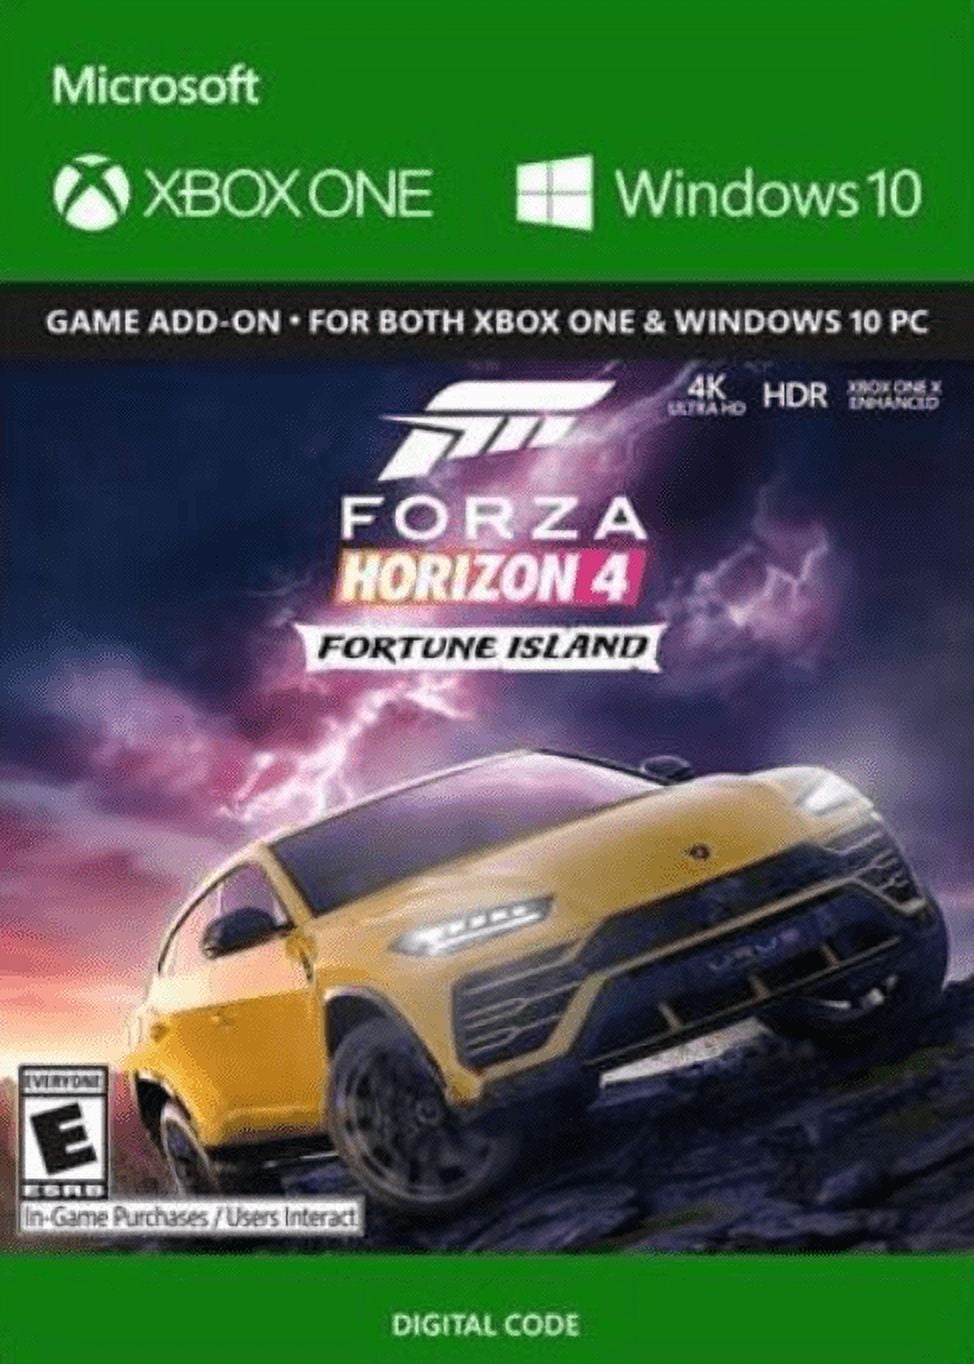 New Forza Horizon 5 Game Digital Code - video gaming - by owner -  electronics media sale - craigslist